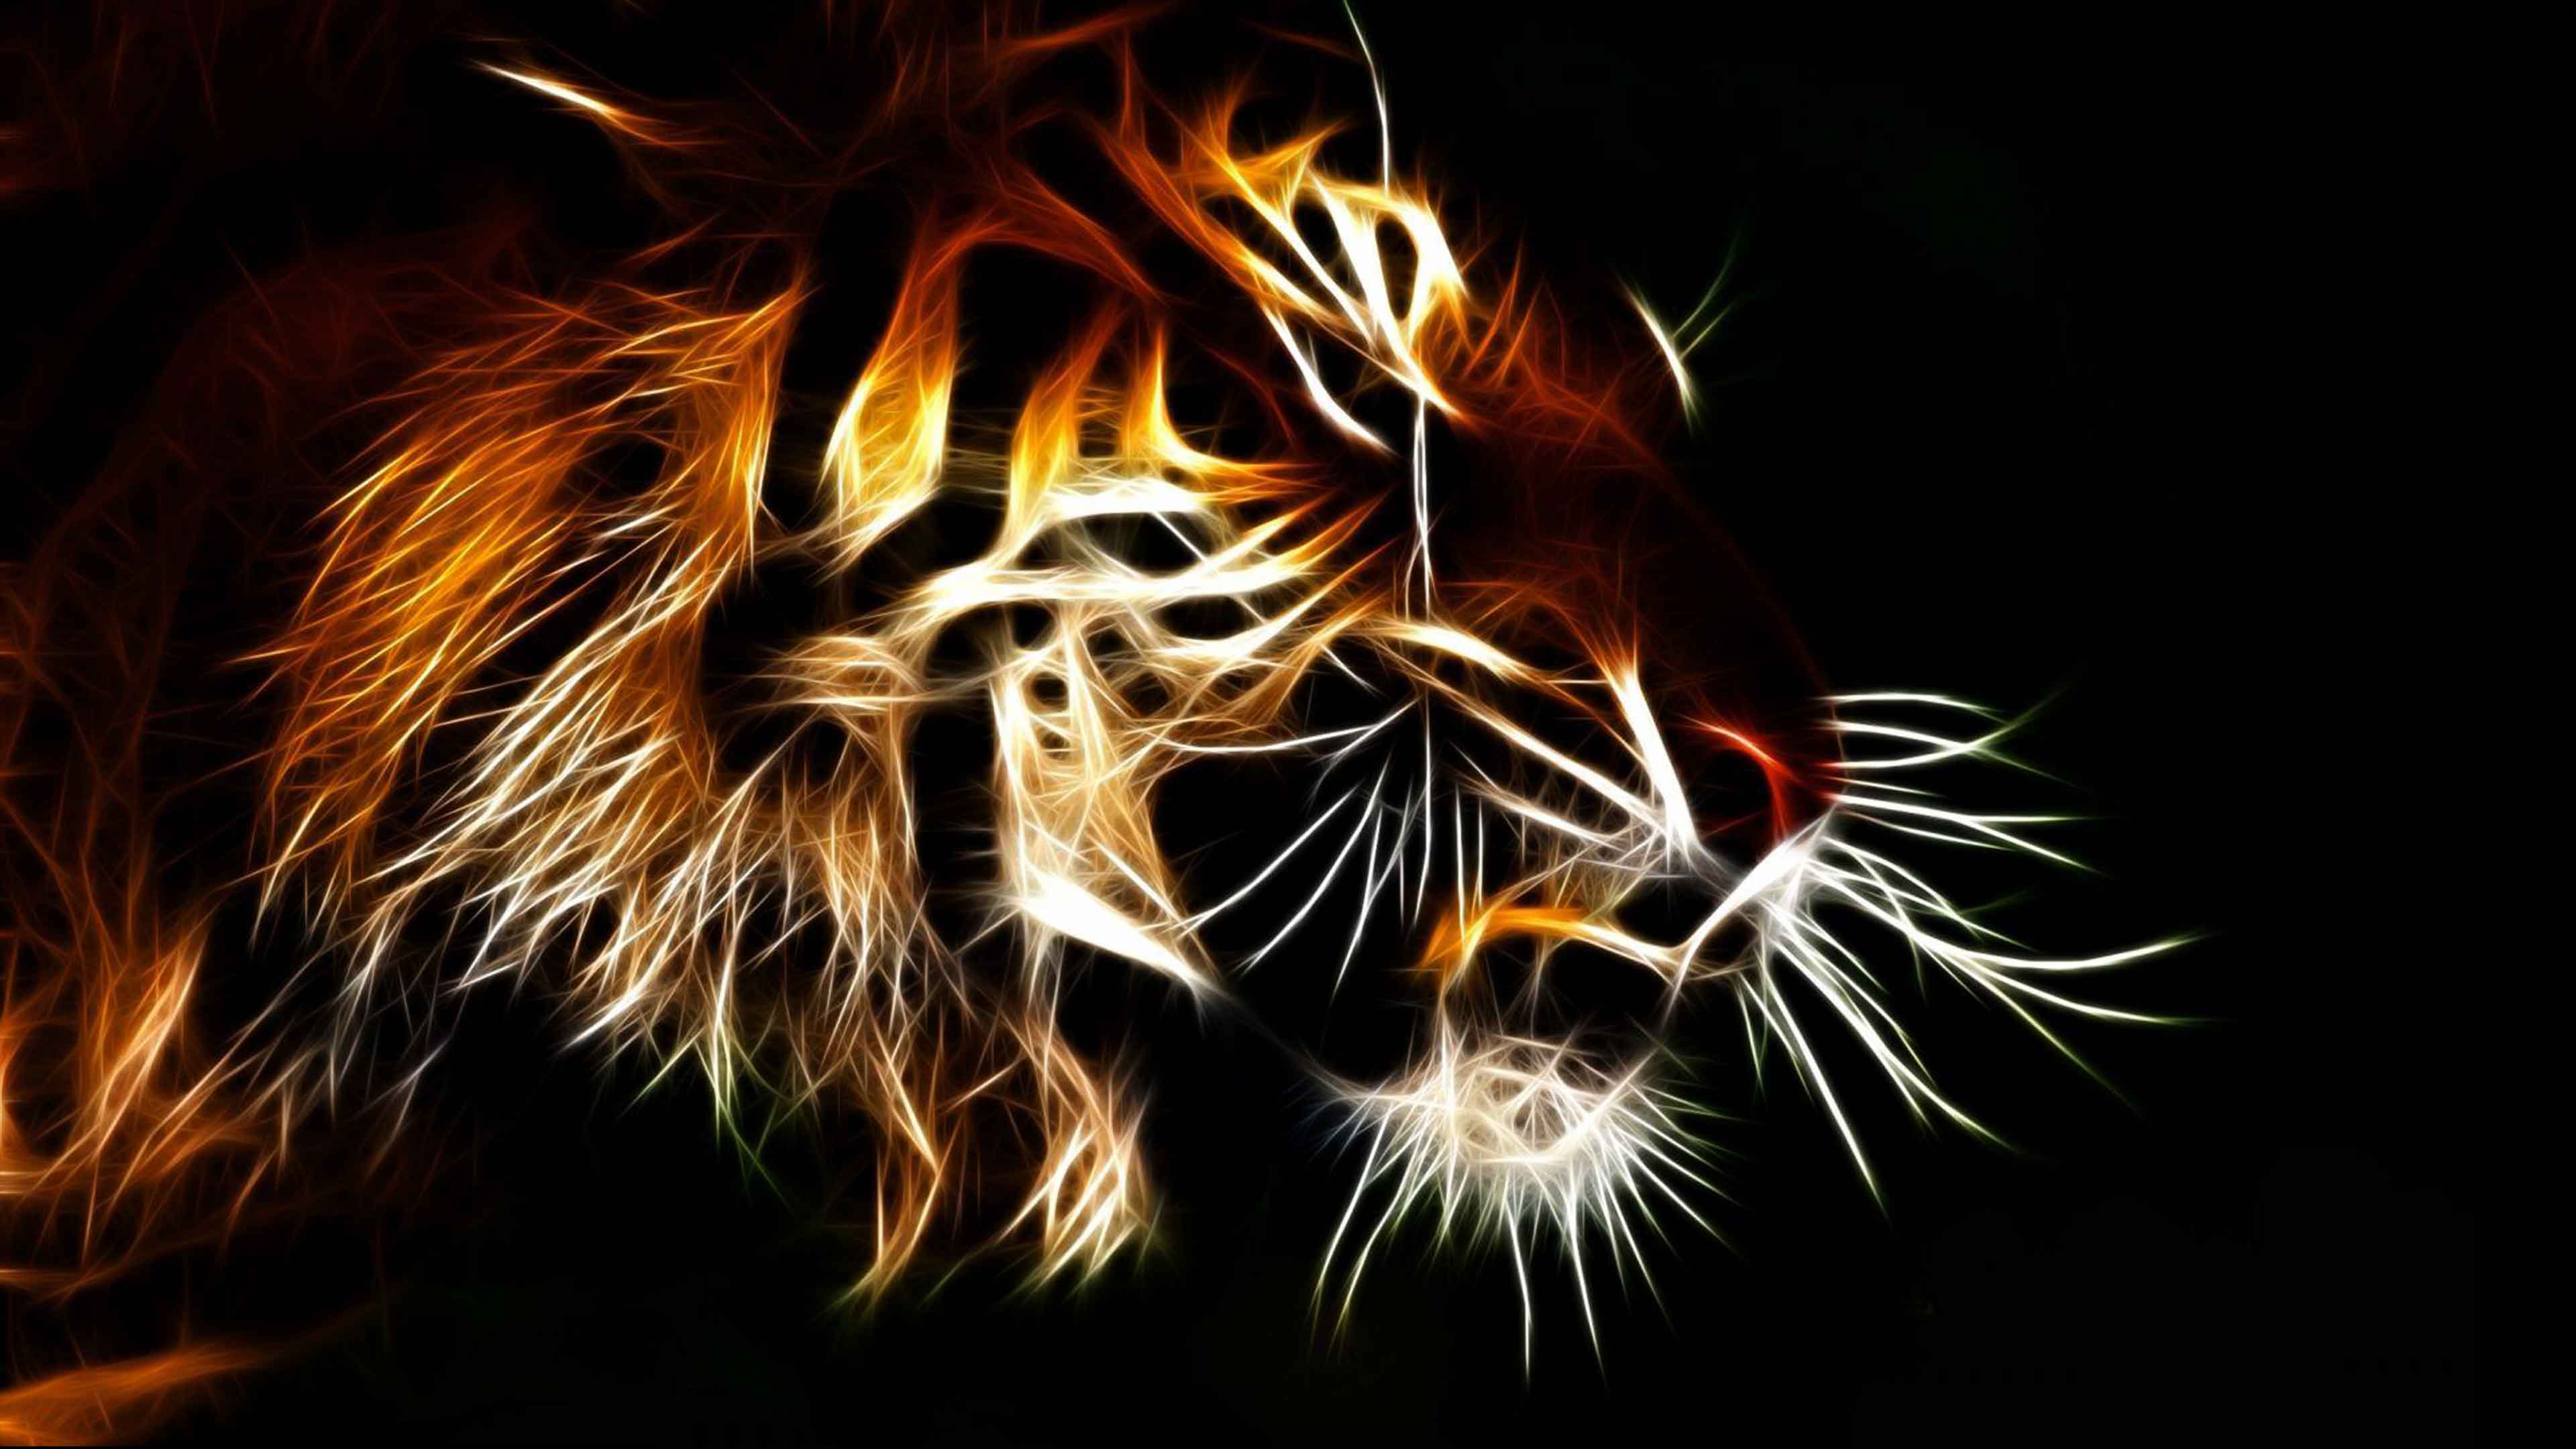 Top Picture: Cool Wallpaper Of Tigers, Amazing Tigers Image